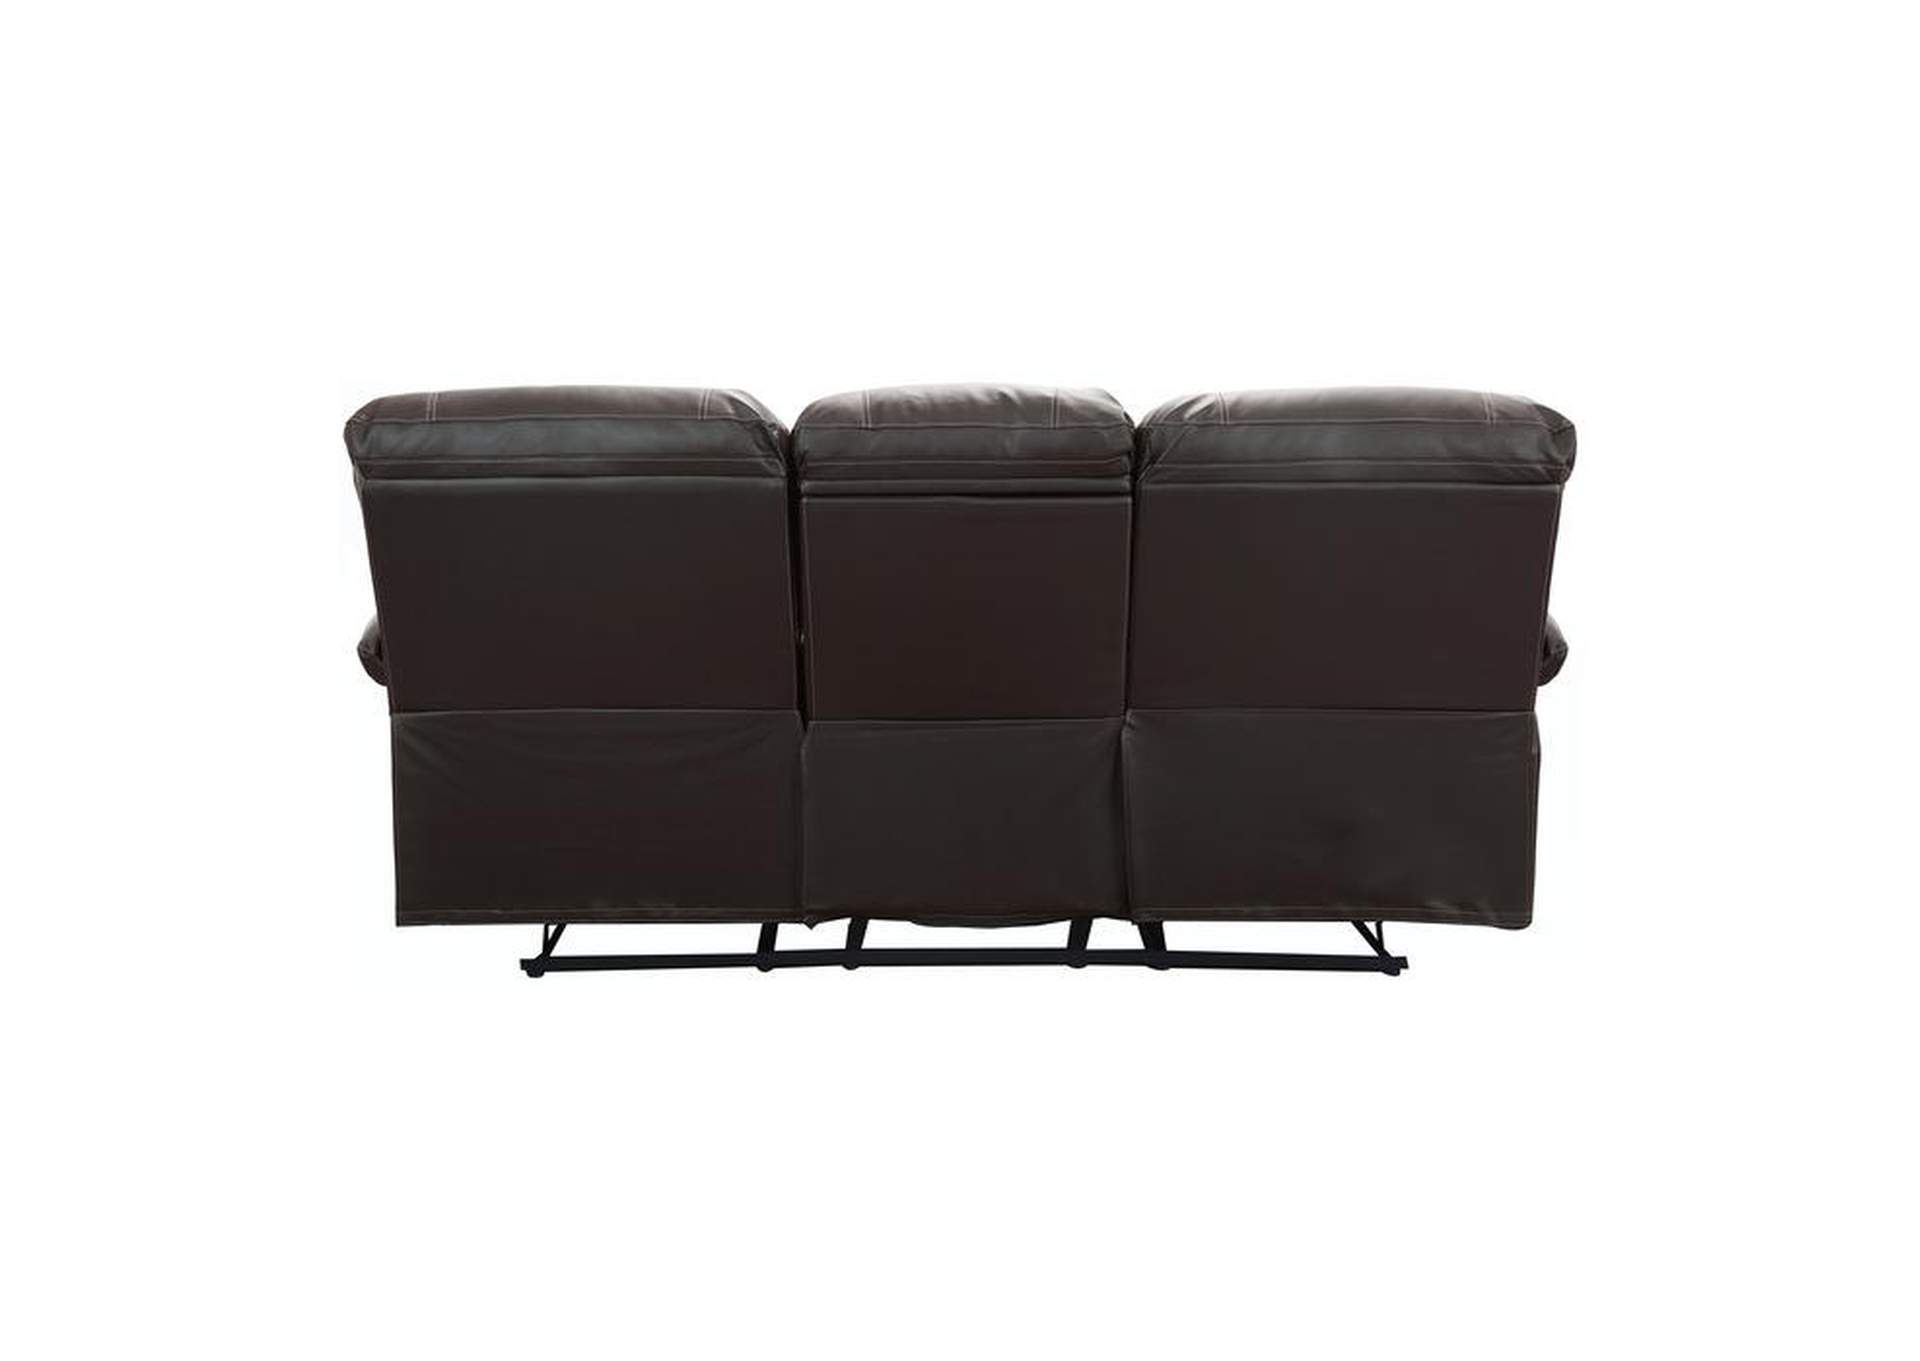 Cassville Double Reclining Sofa With Center Drop-Down Cup Holders,Homelegance